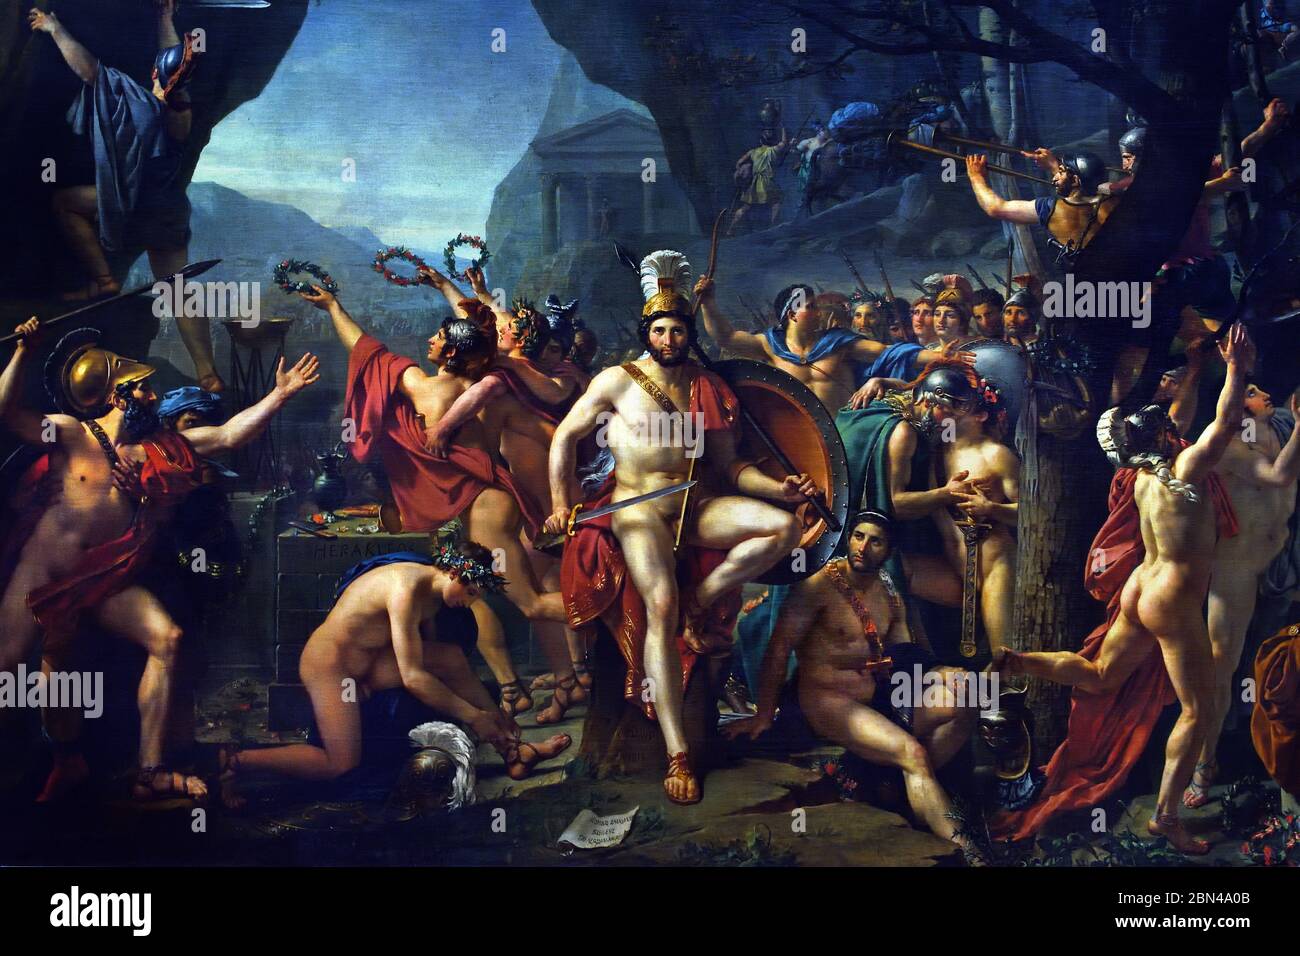 Leonidas at Thermopylae, by Jacques-Louis David, 1814 France French, Leonidas was the Spartan king who famously led a small band of Greek allies at the Battle of Thermopylae in 480 BCE where the Greeks valiantly defended the pass through which the Persian king Xerxes sought to invade Greece with his massive army. Stock Photo